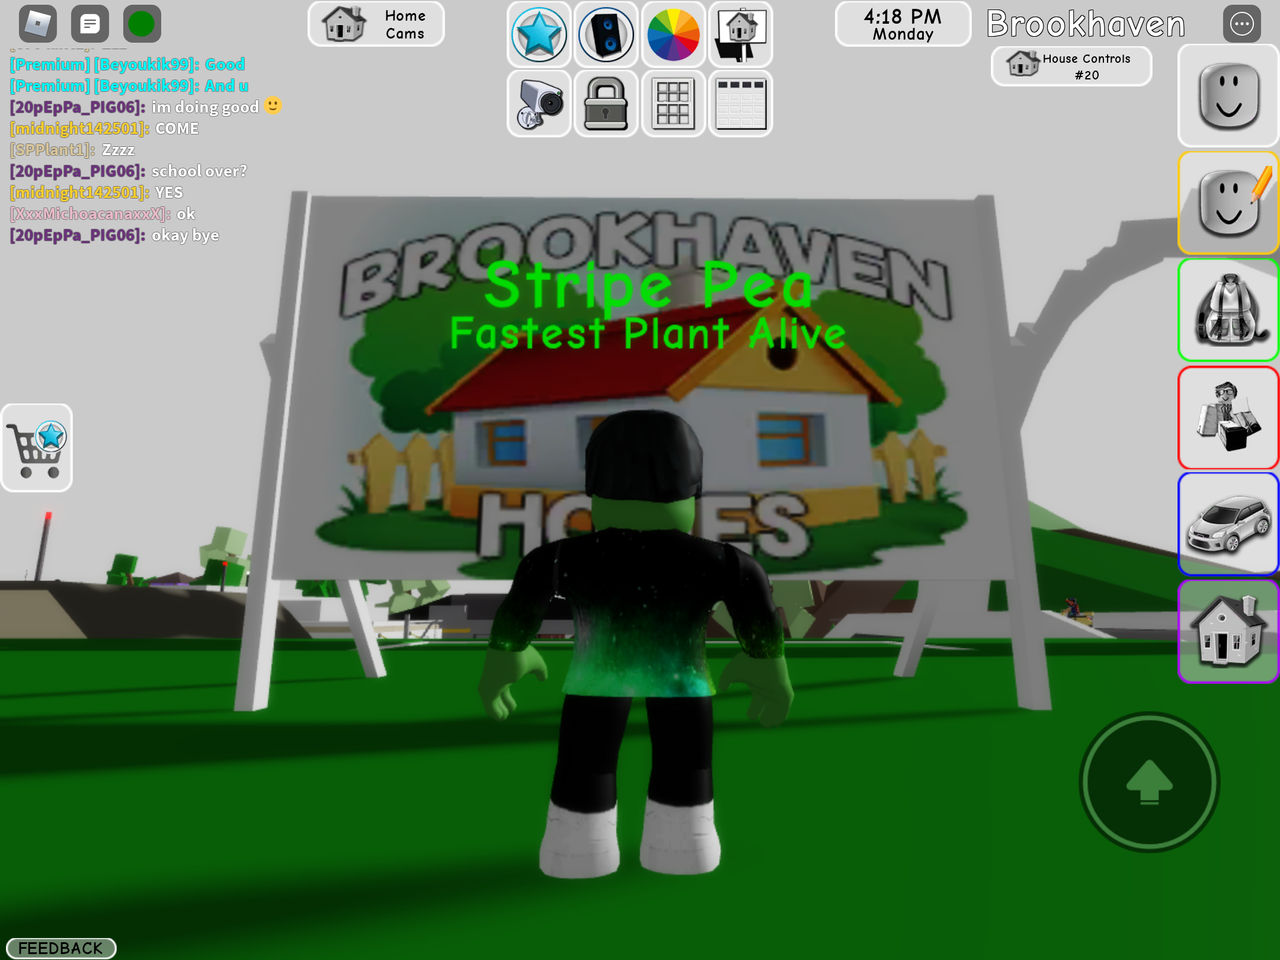 First Time Playing Brookhaven by StripeOfficialArt on DeviantArt